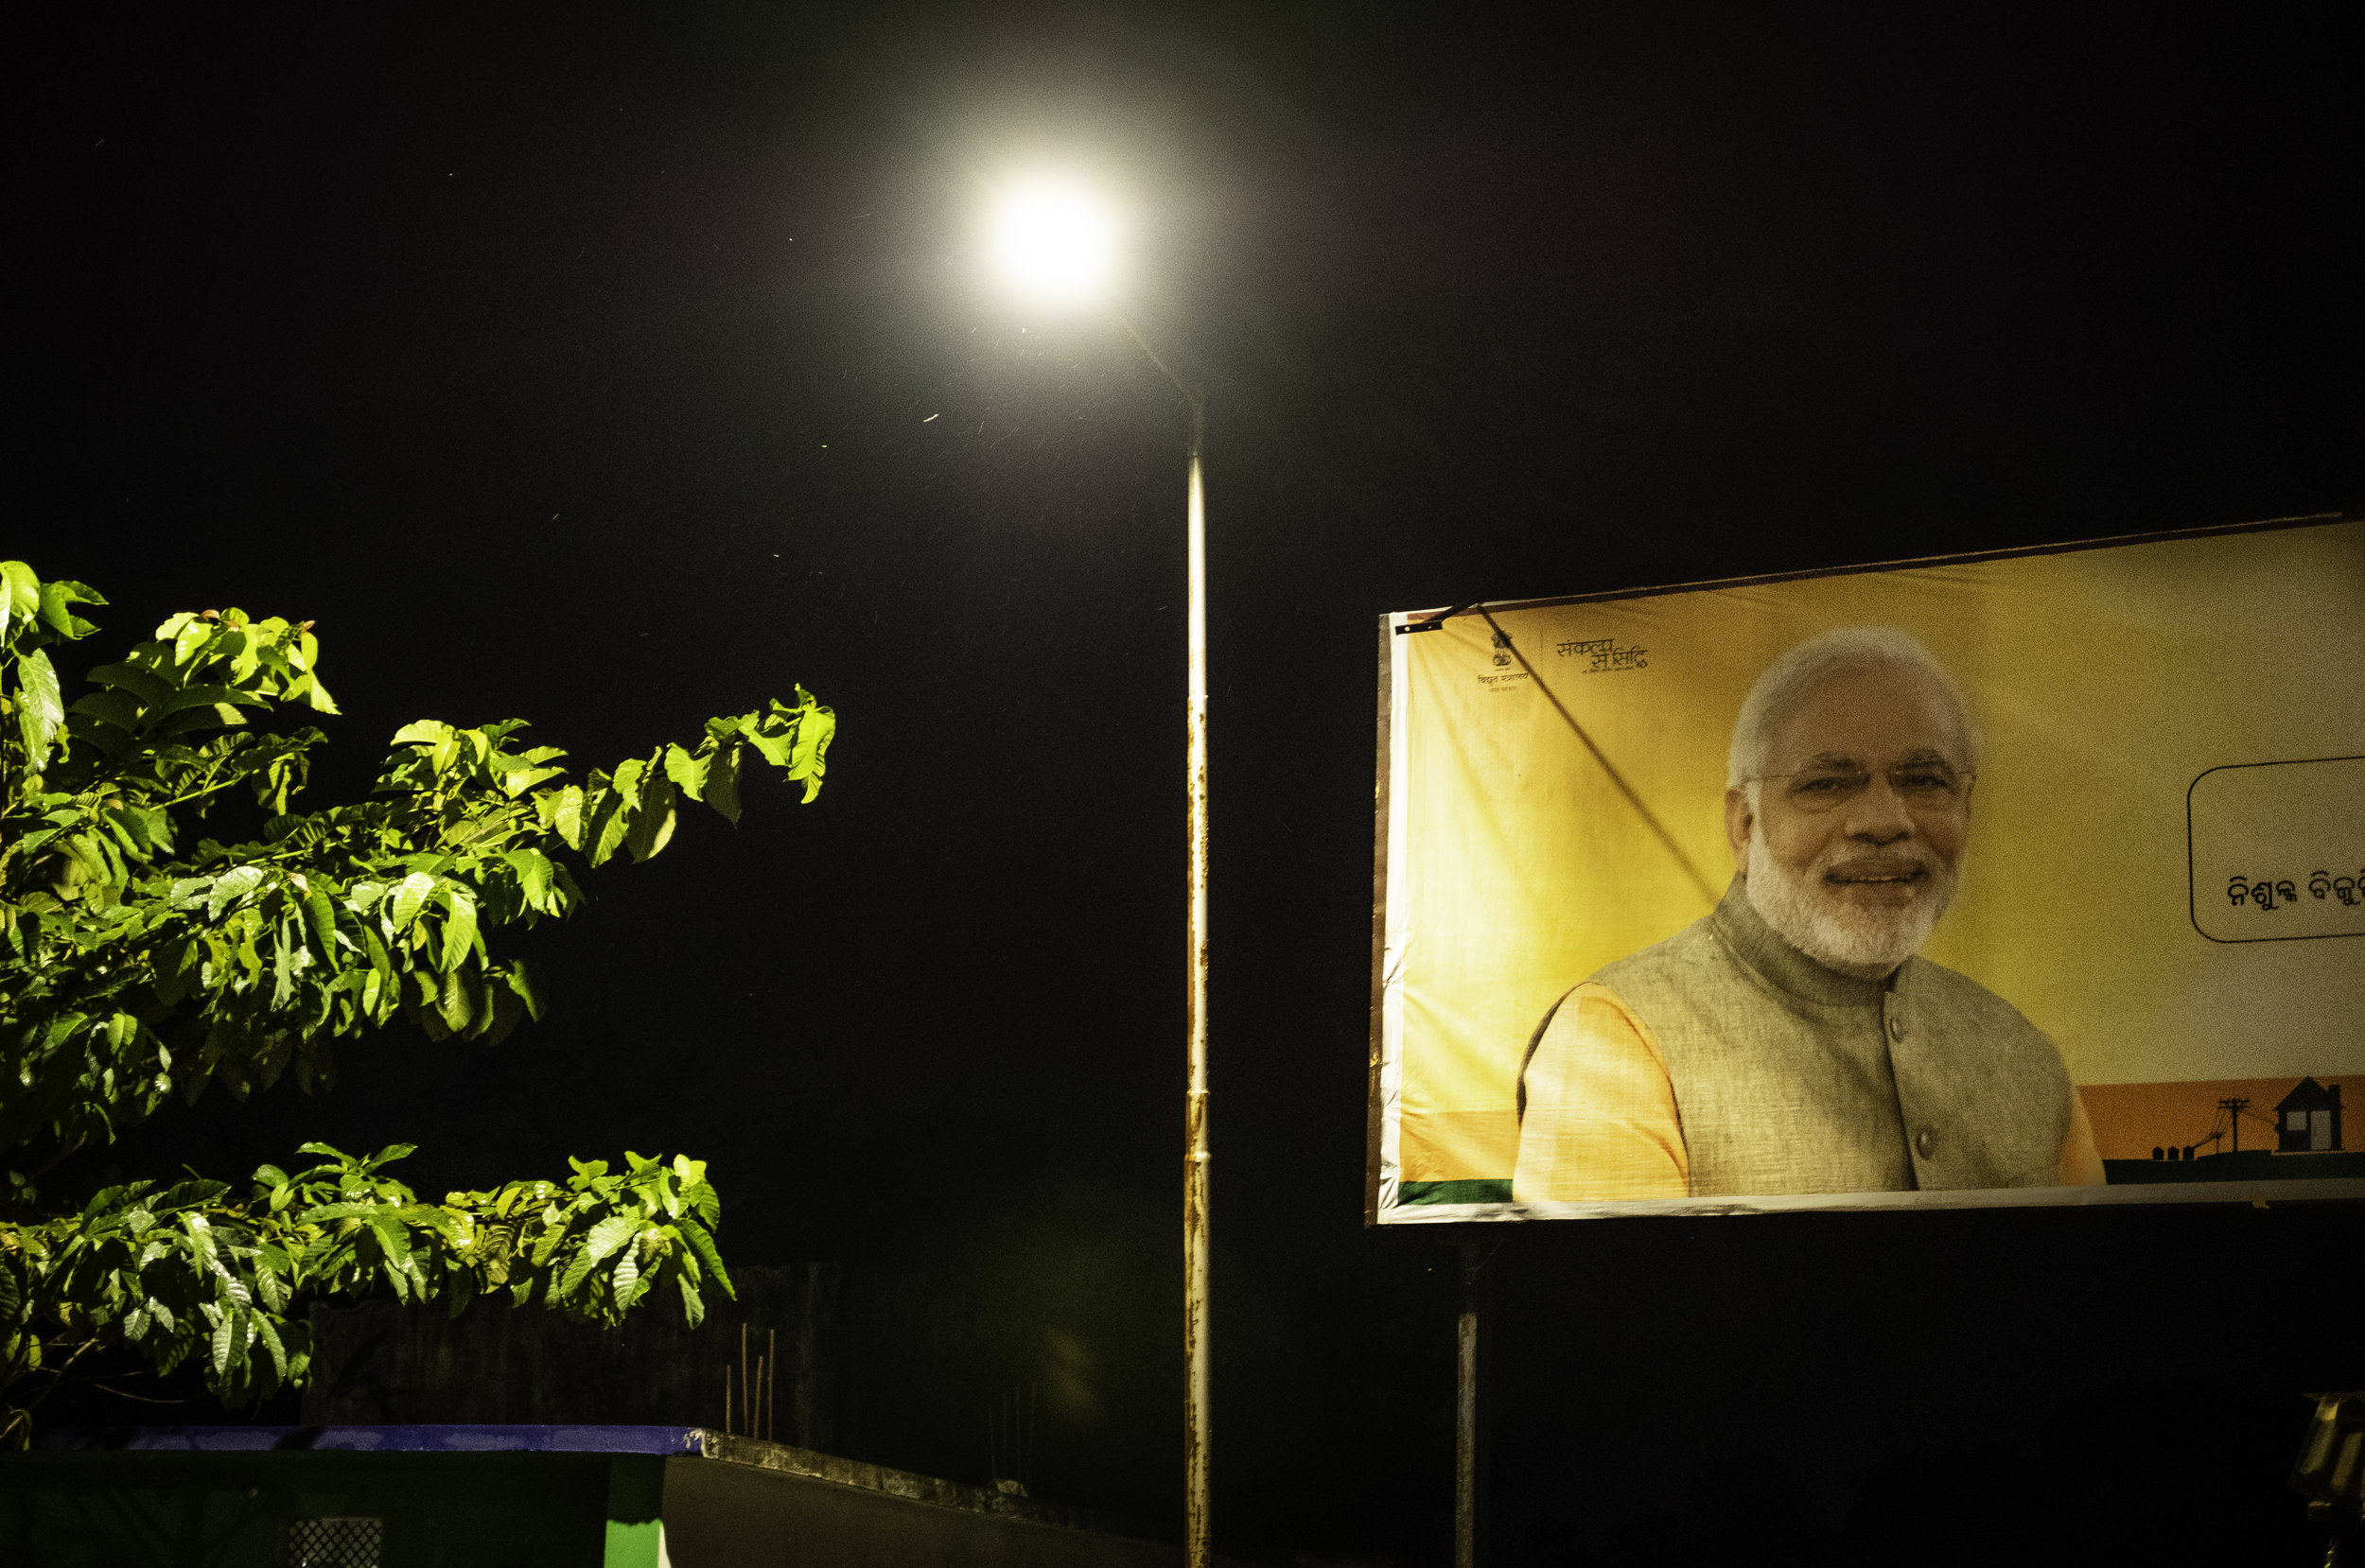   Indian Prime Minister Narendra Modi’s photograph appears on many billboards throughout the Kandhamal area of India’s Odisha state. During the Summer of 2008, men and women of Rashtriya Swayamsevak Sangh (RSS), a Hindu nationalist group, participate